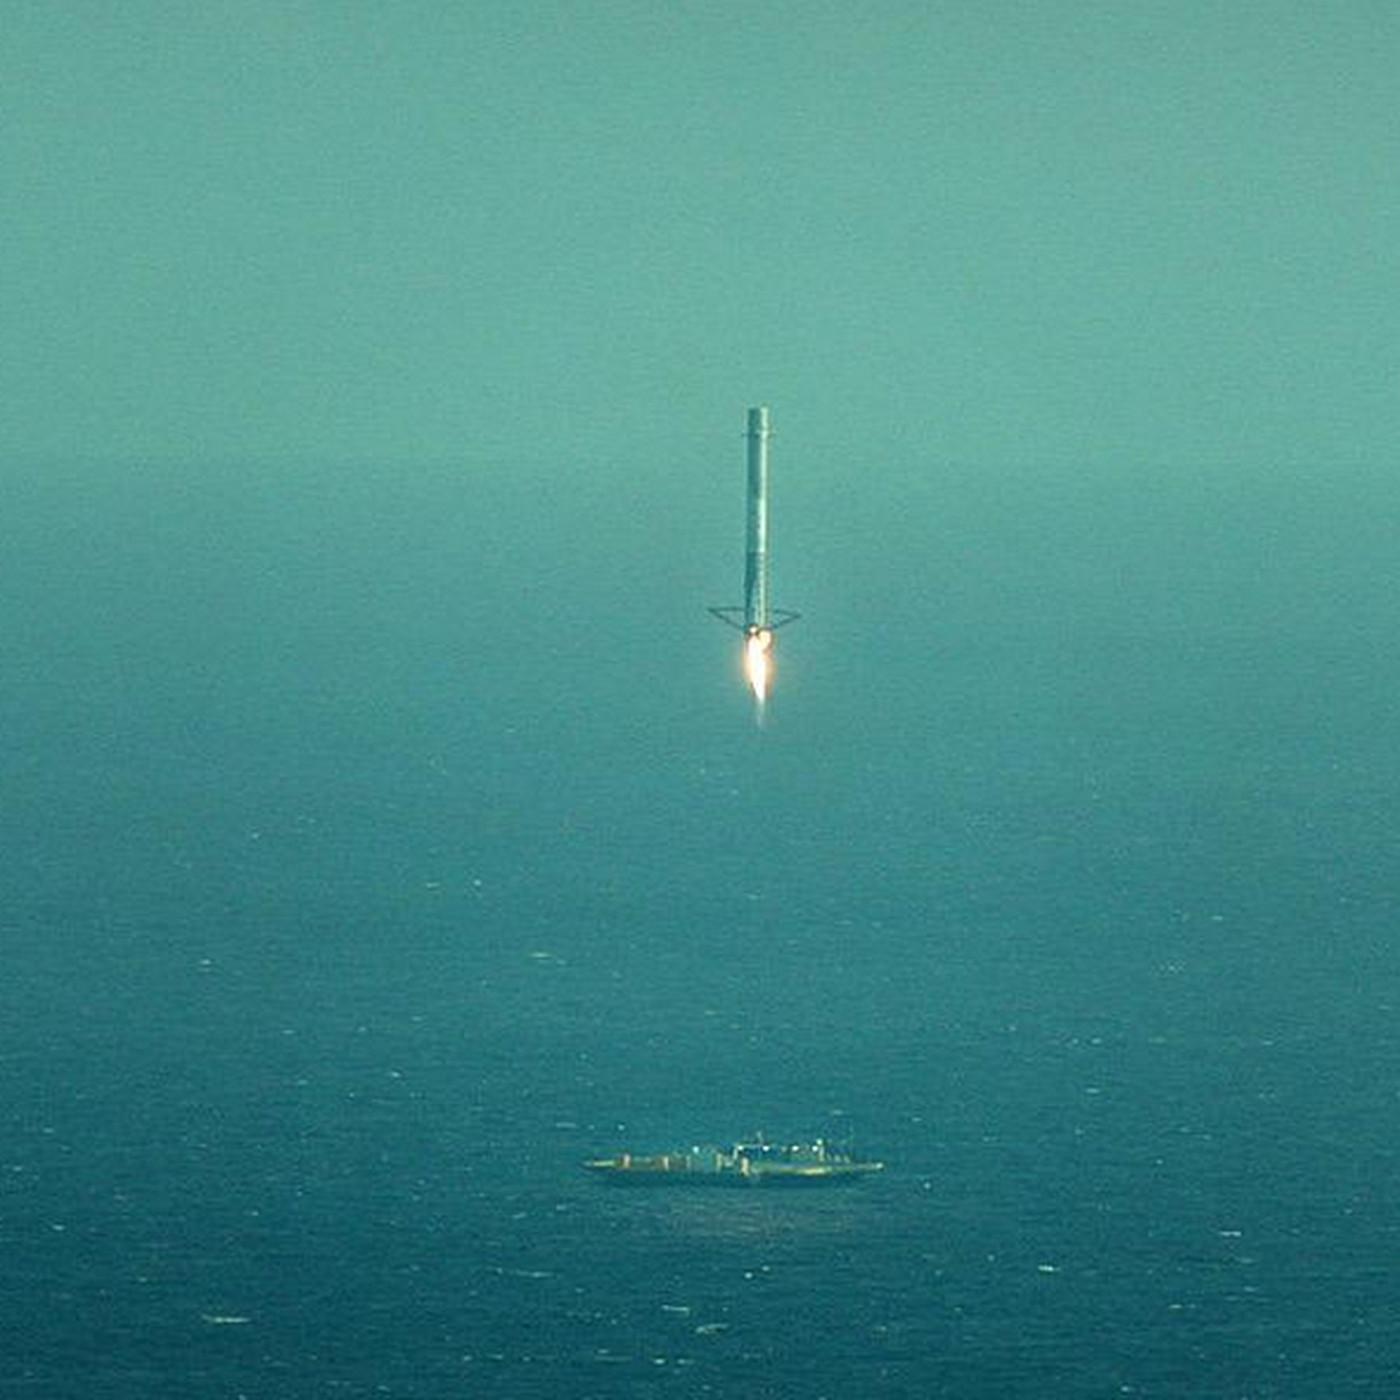 SpaceX failed to land a rocket on a barge - but they're getting closer